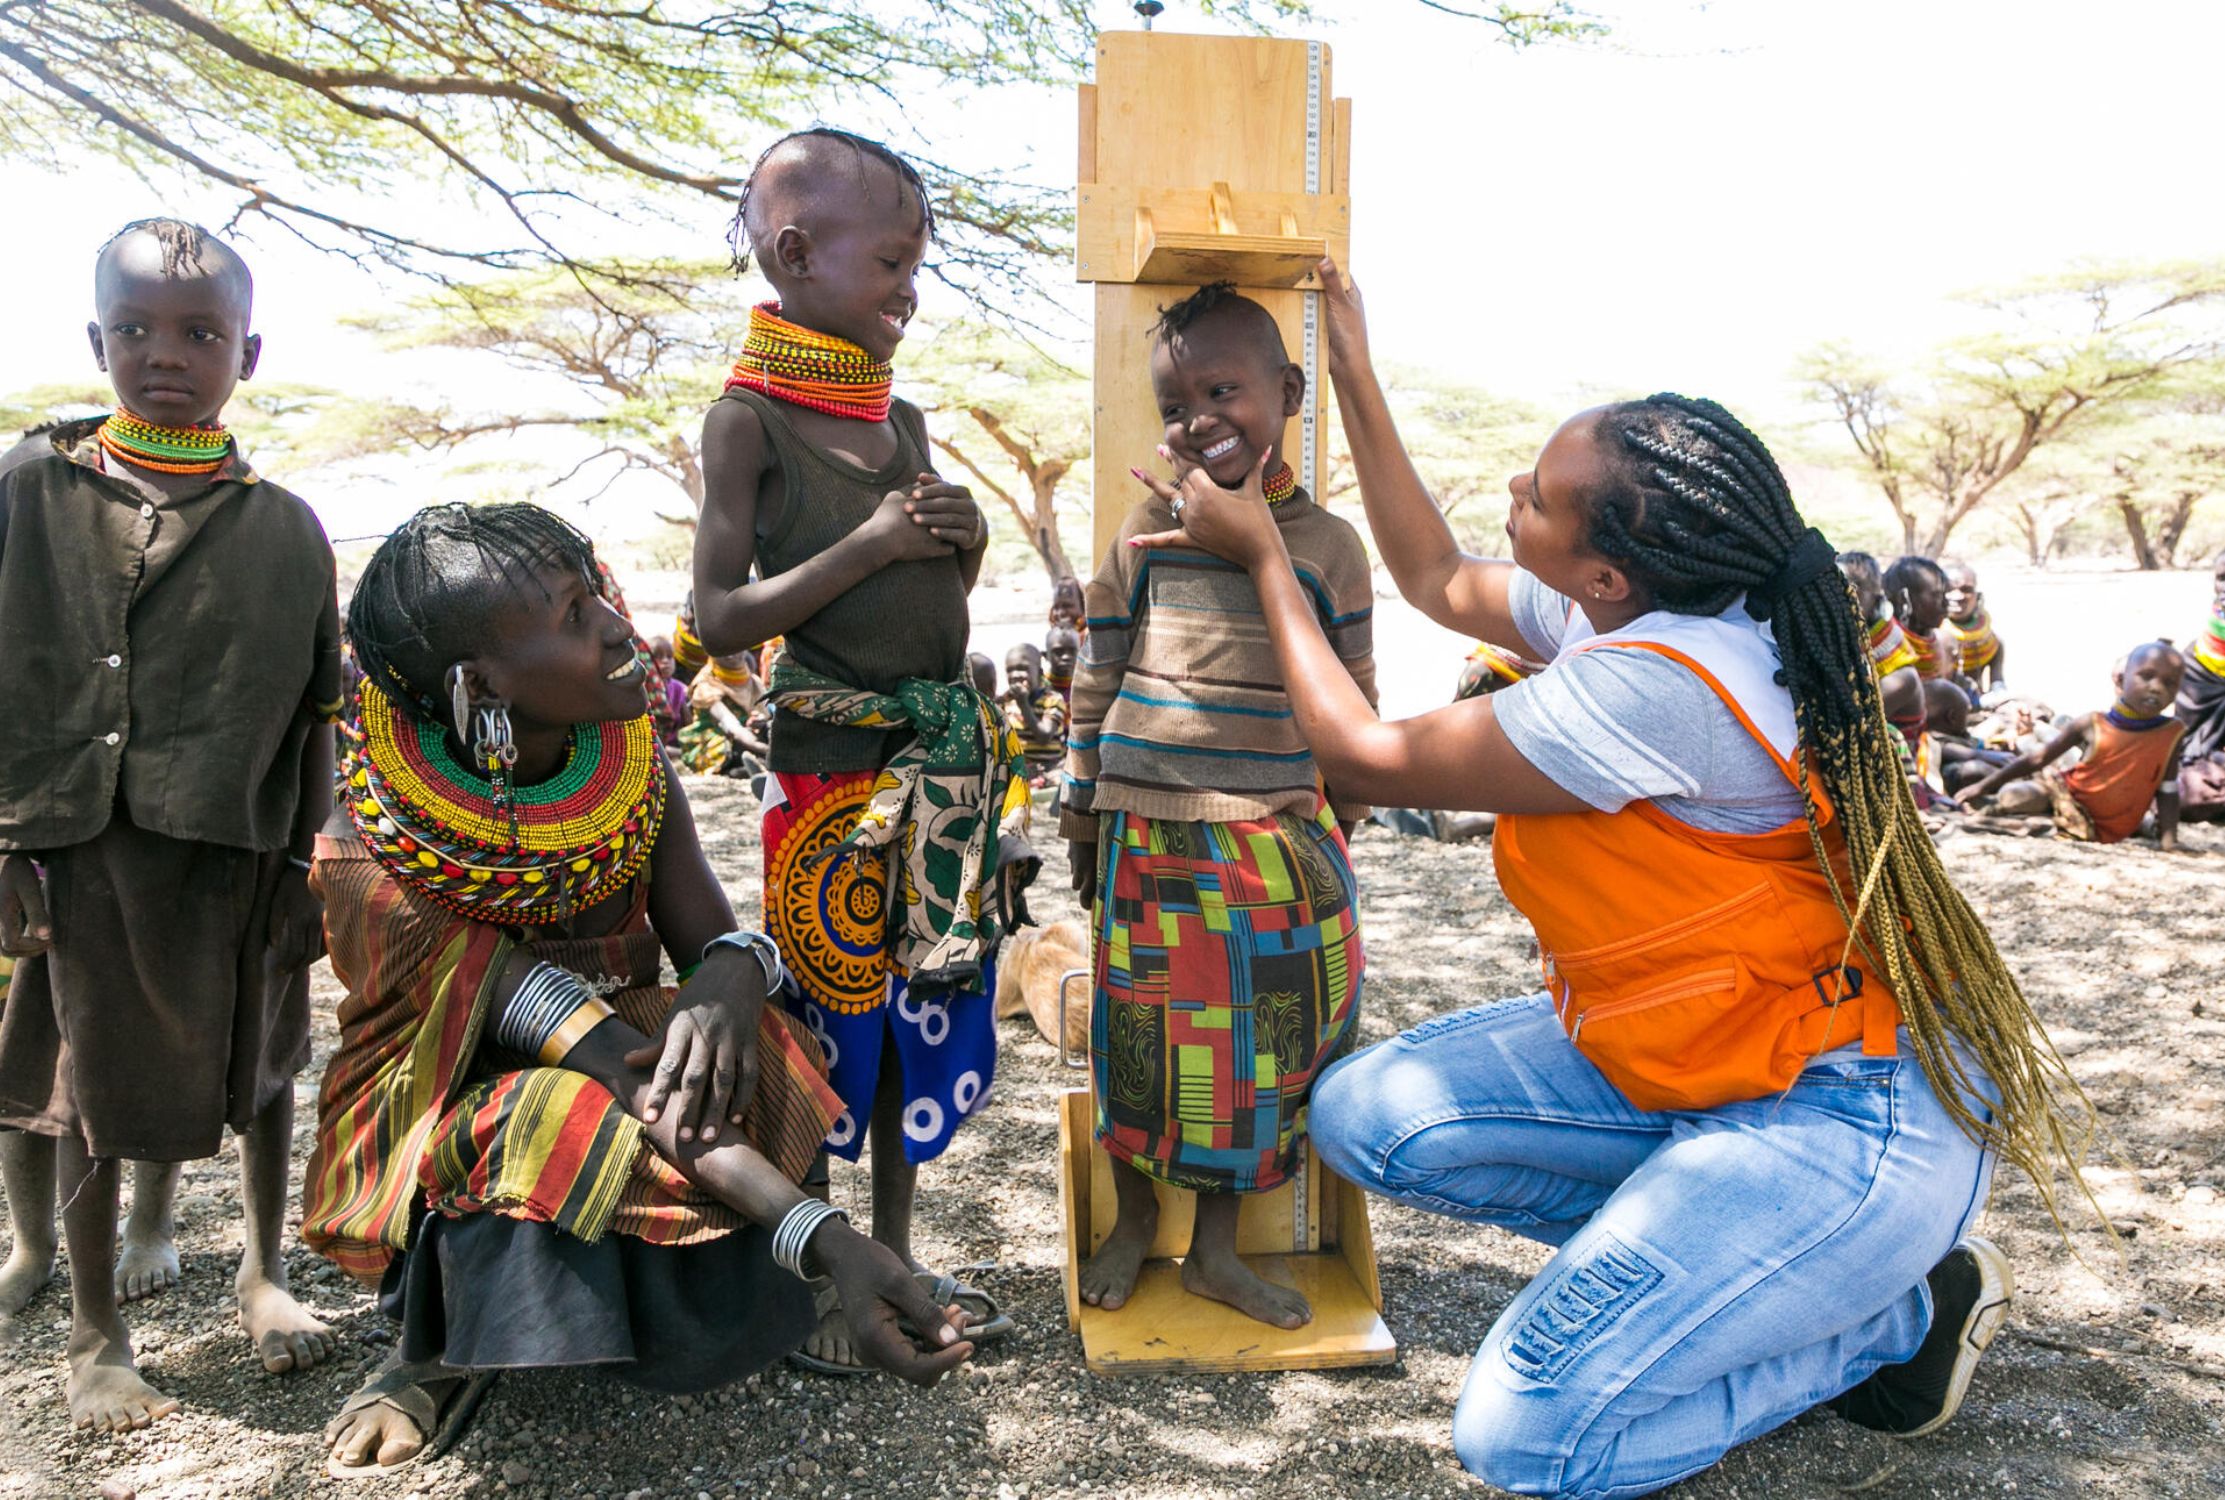 World Vision staff measure the height of Kenyan children as part of malnutrition screening.